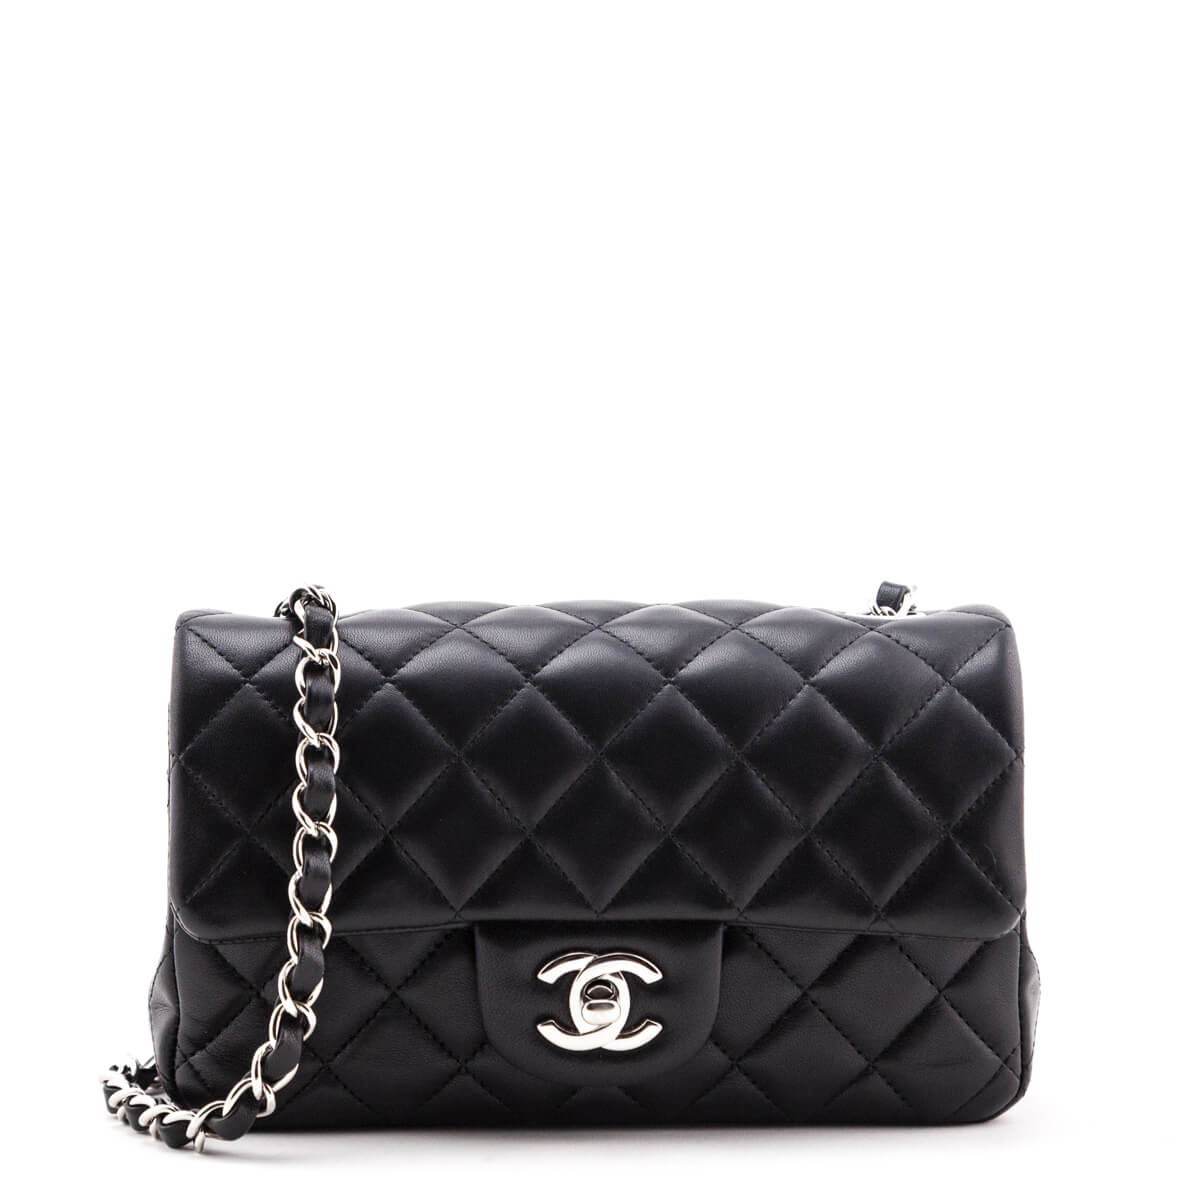 Chanel Black Quilted Lambskin Mini Classic Rectangle Flap Bag SHW